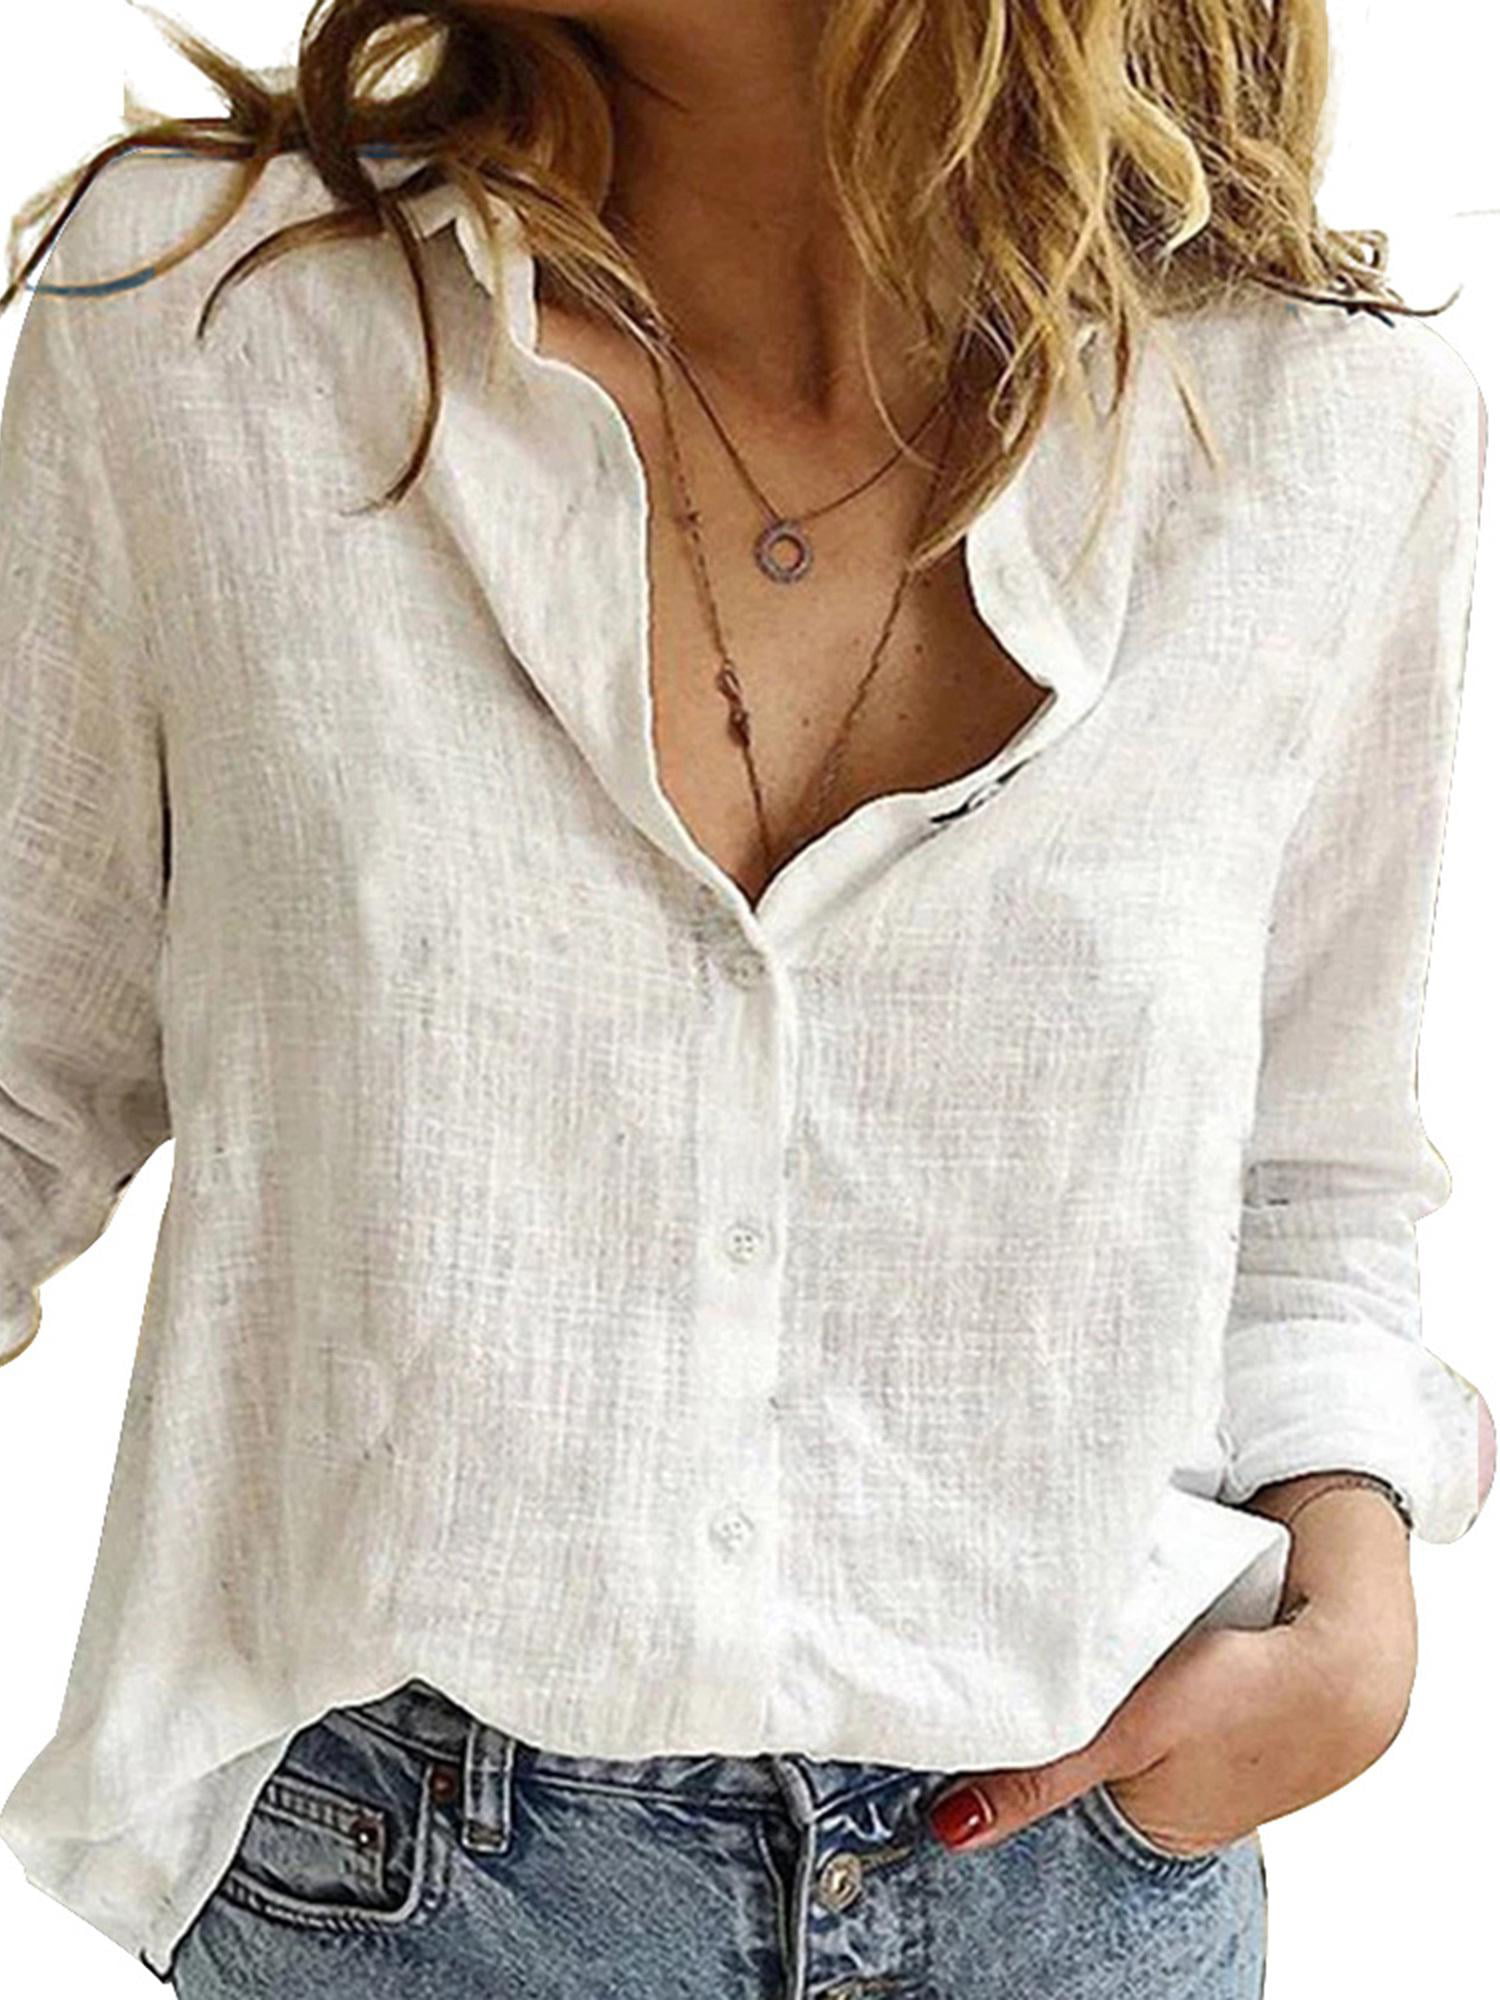 Astylish Women Casual Cuffed 3 4 Sleeve Button up V Neck Tunic Shirts Tops